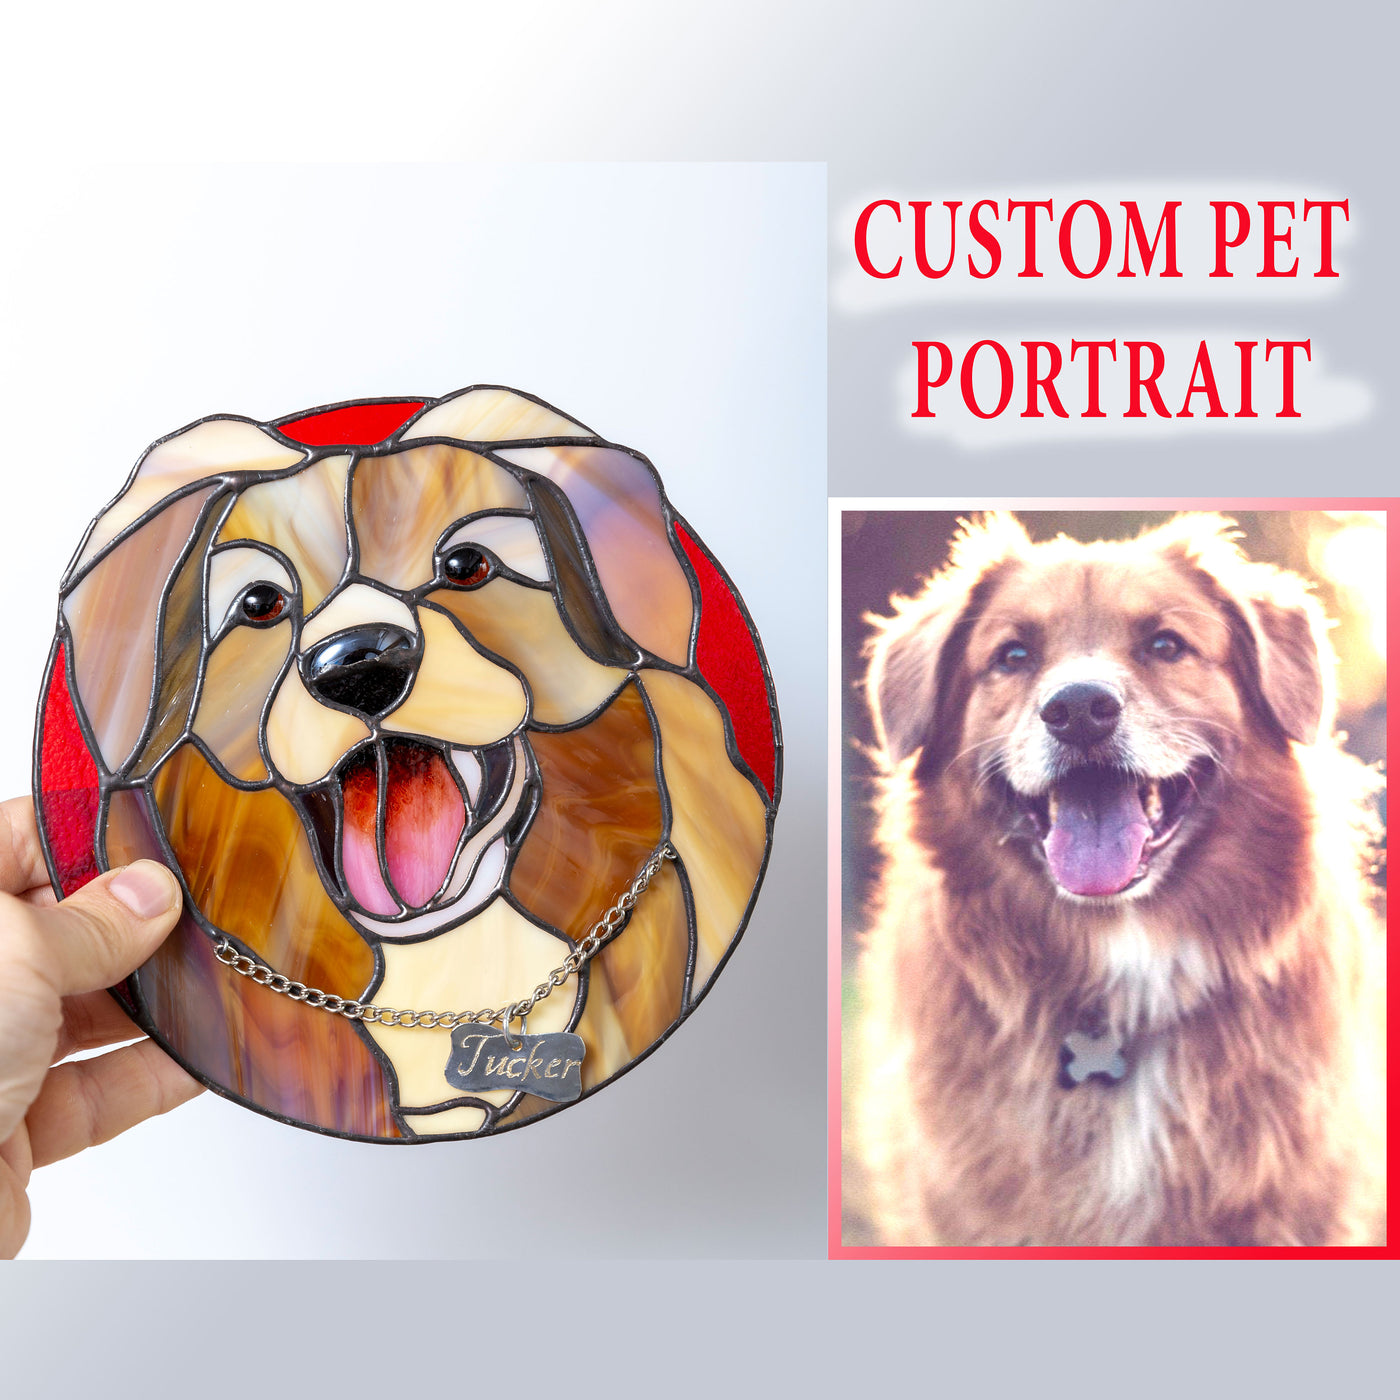 Round stained glass custom window hanging depicting a dog with its name on the collar